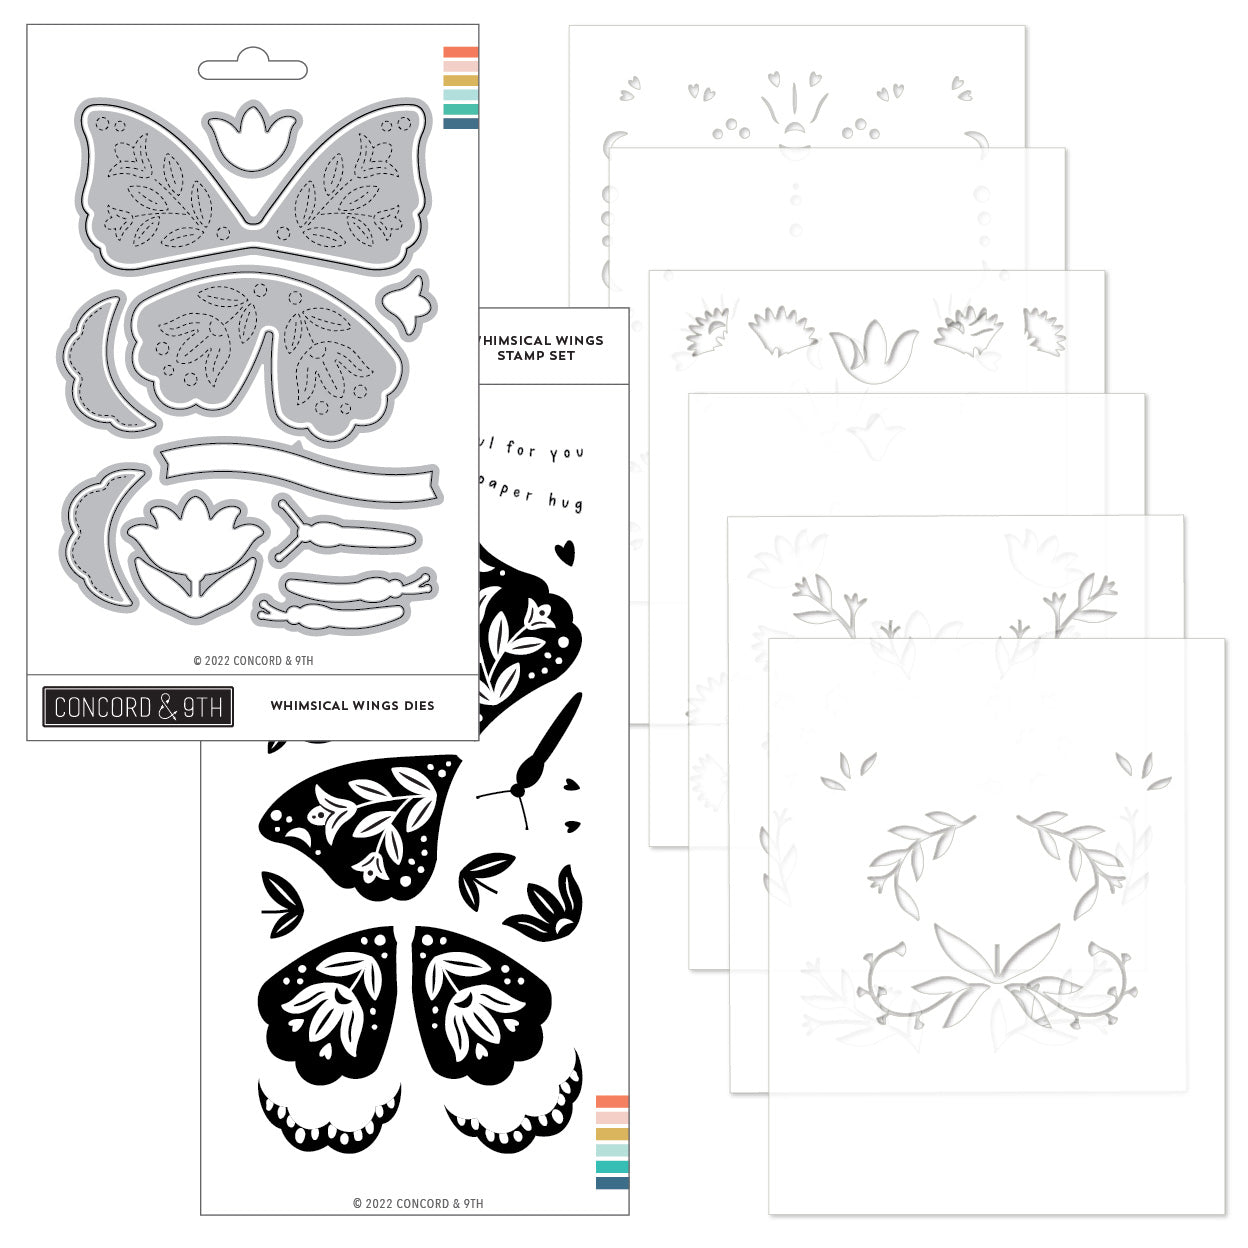 Bold Butterflies Stamp Set - Concord & 9th